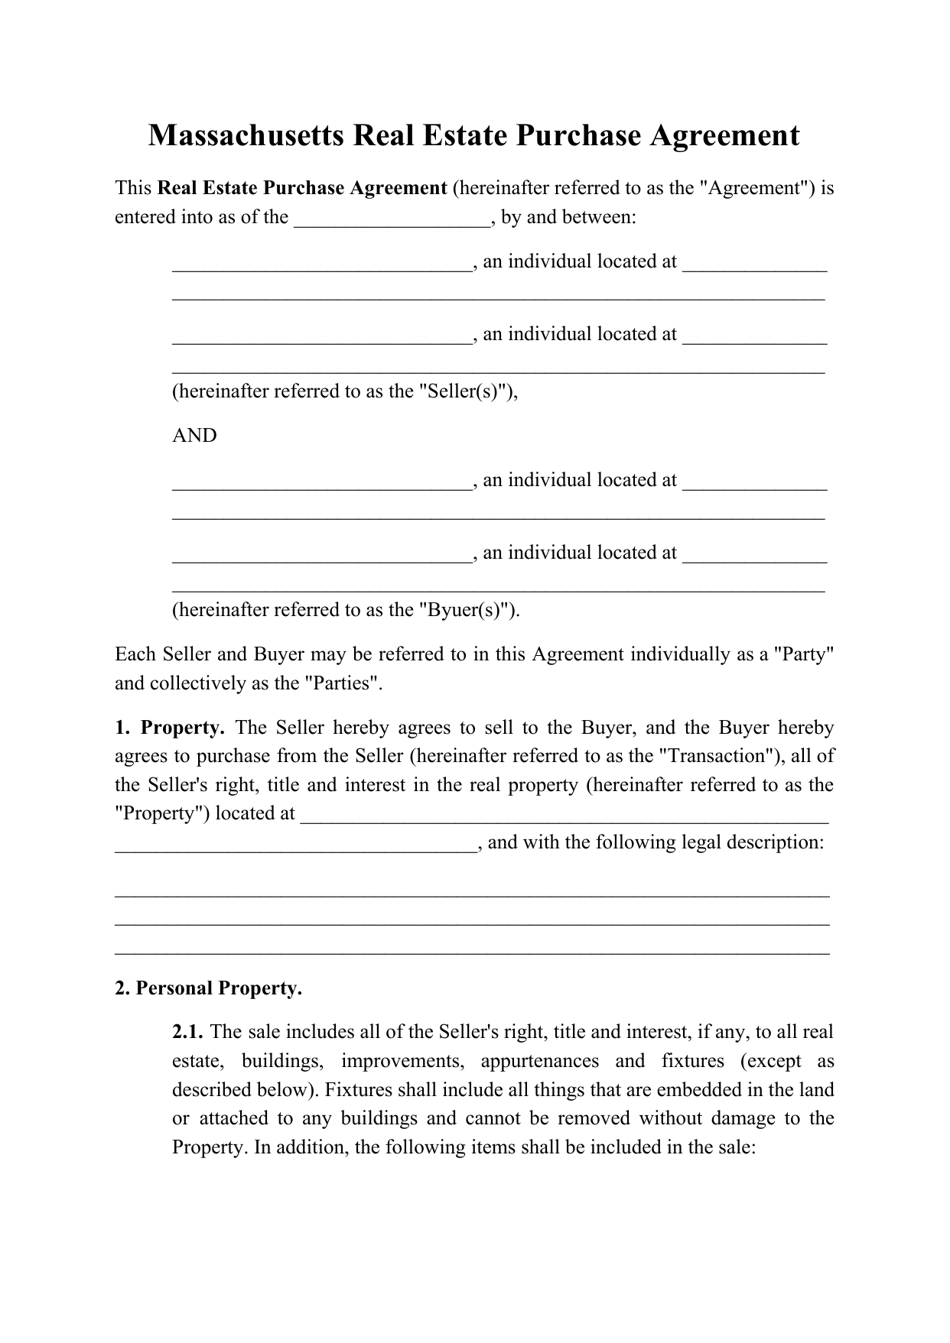 Real Estate Purchase Agreement Template - Massachusetts, Page 1